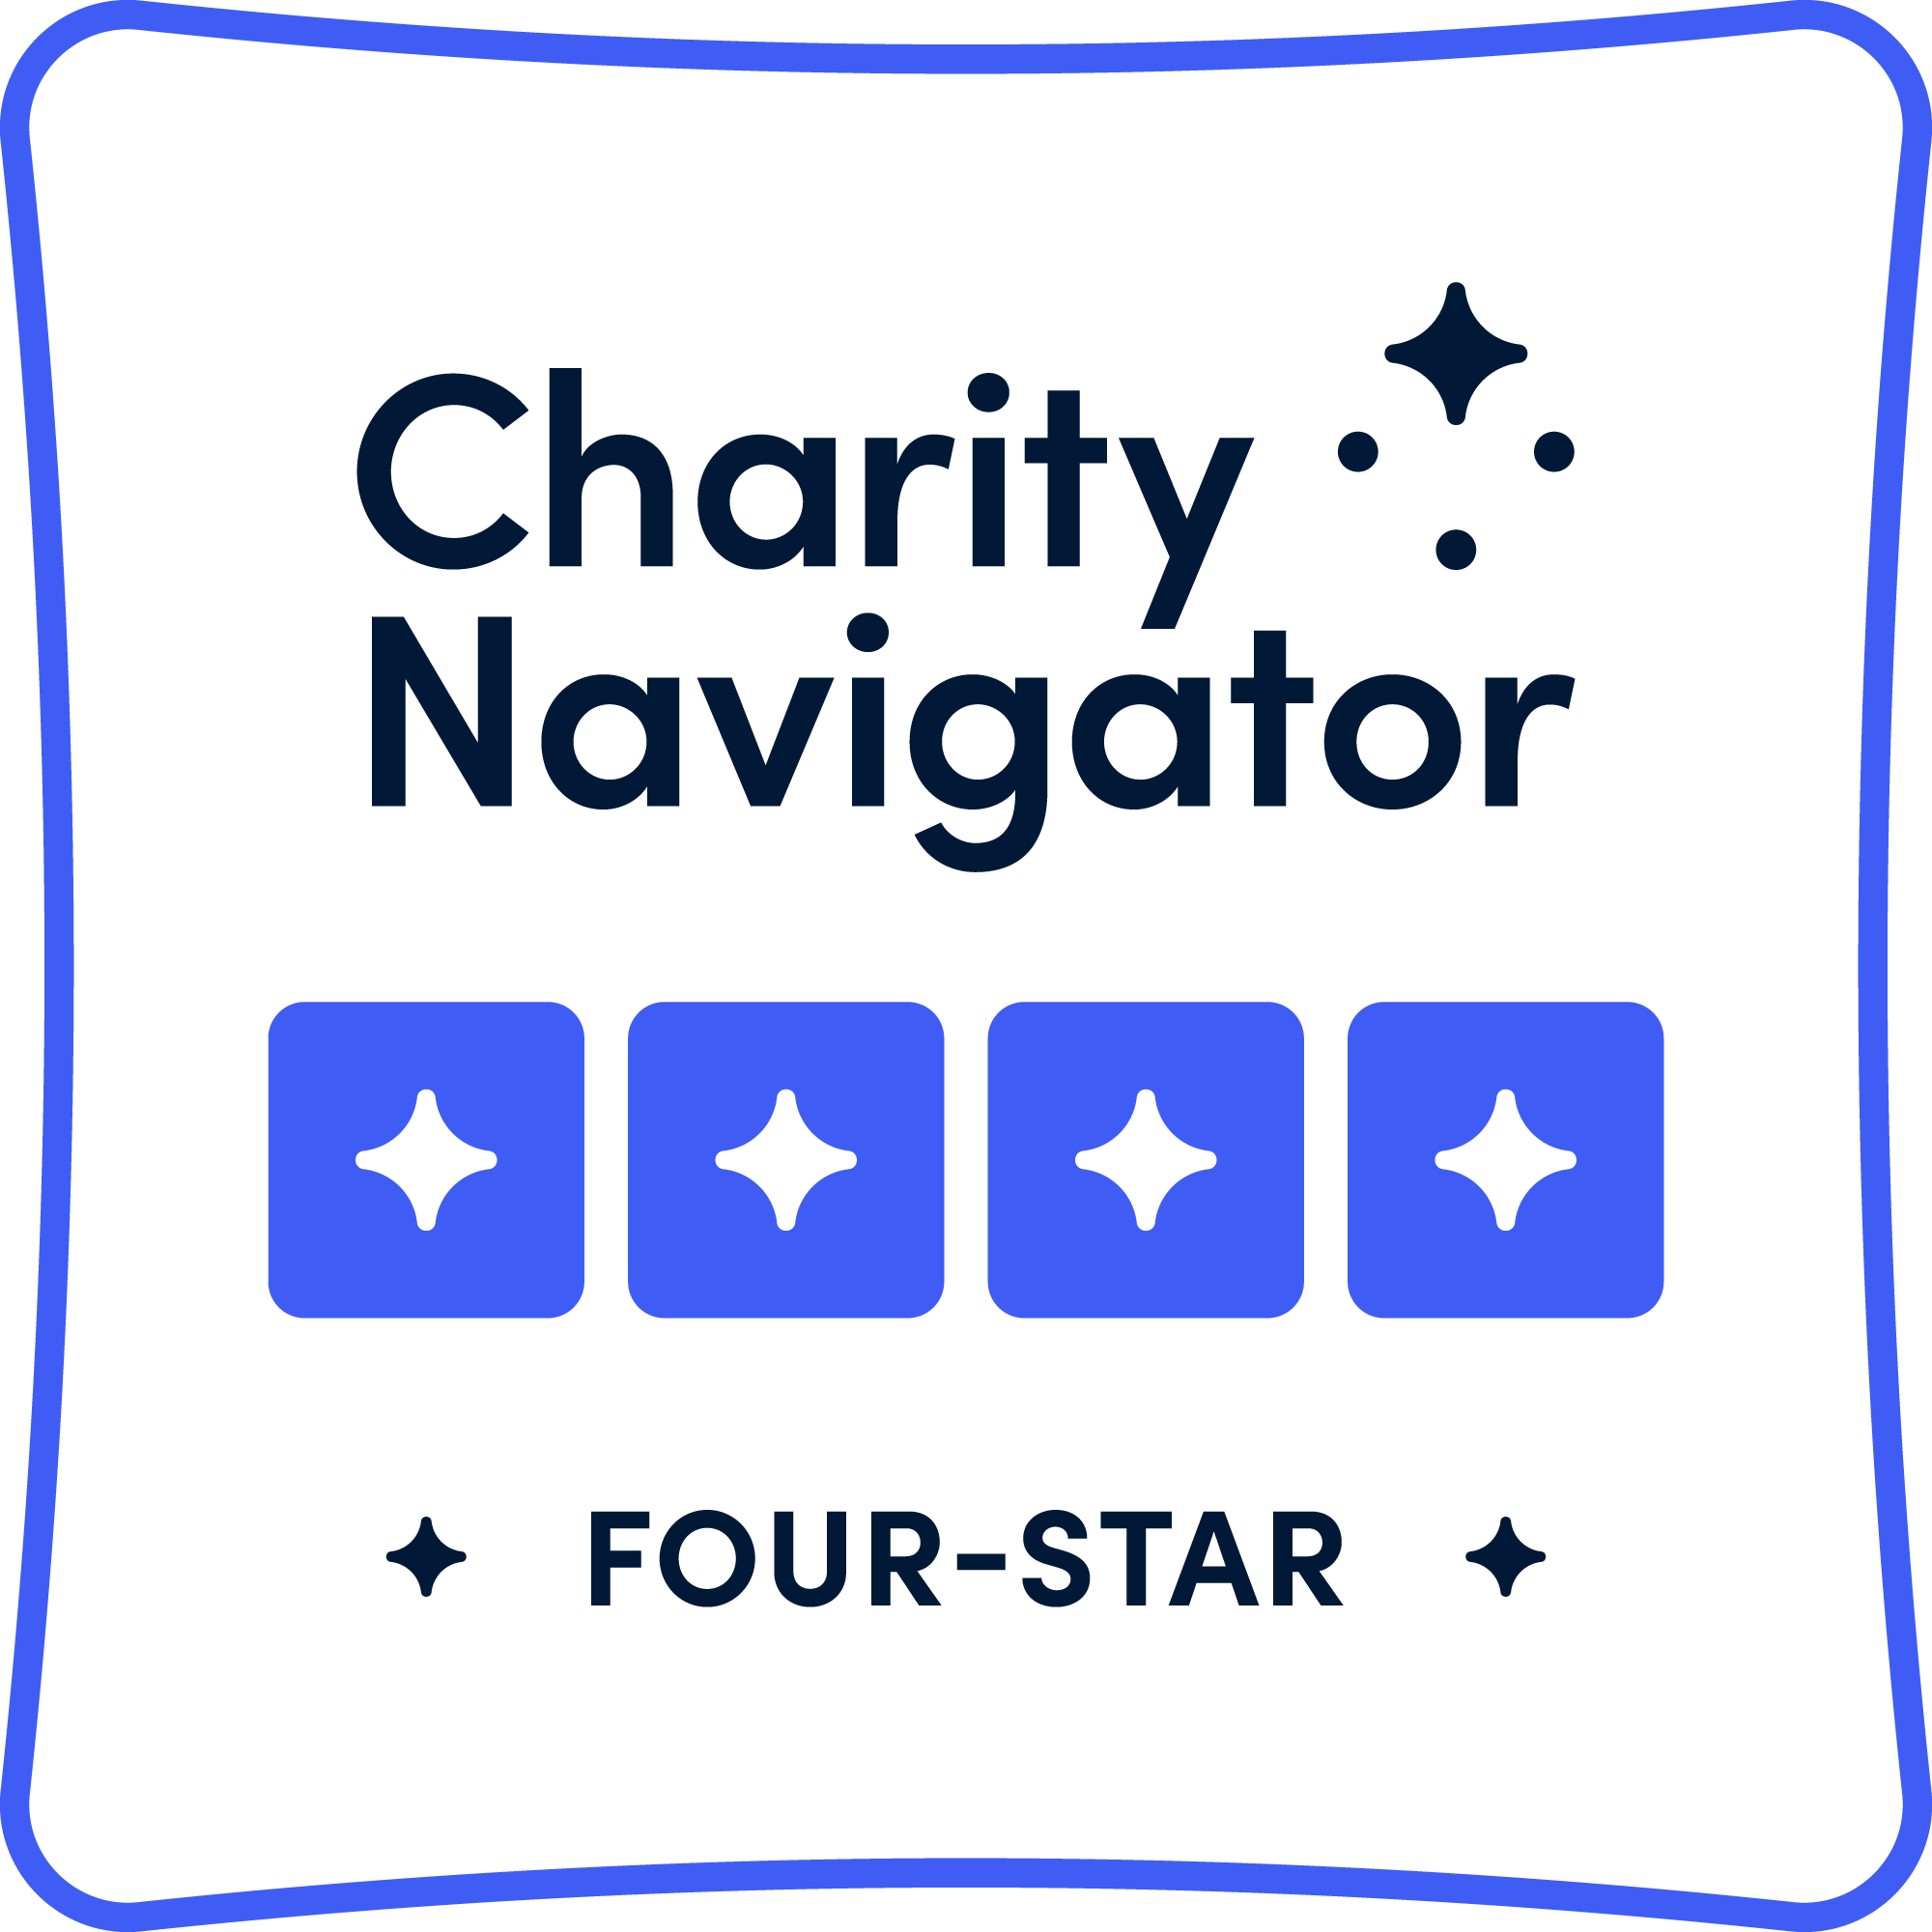 Four-Star-Rating-Charity-Navigator.png